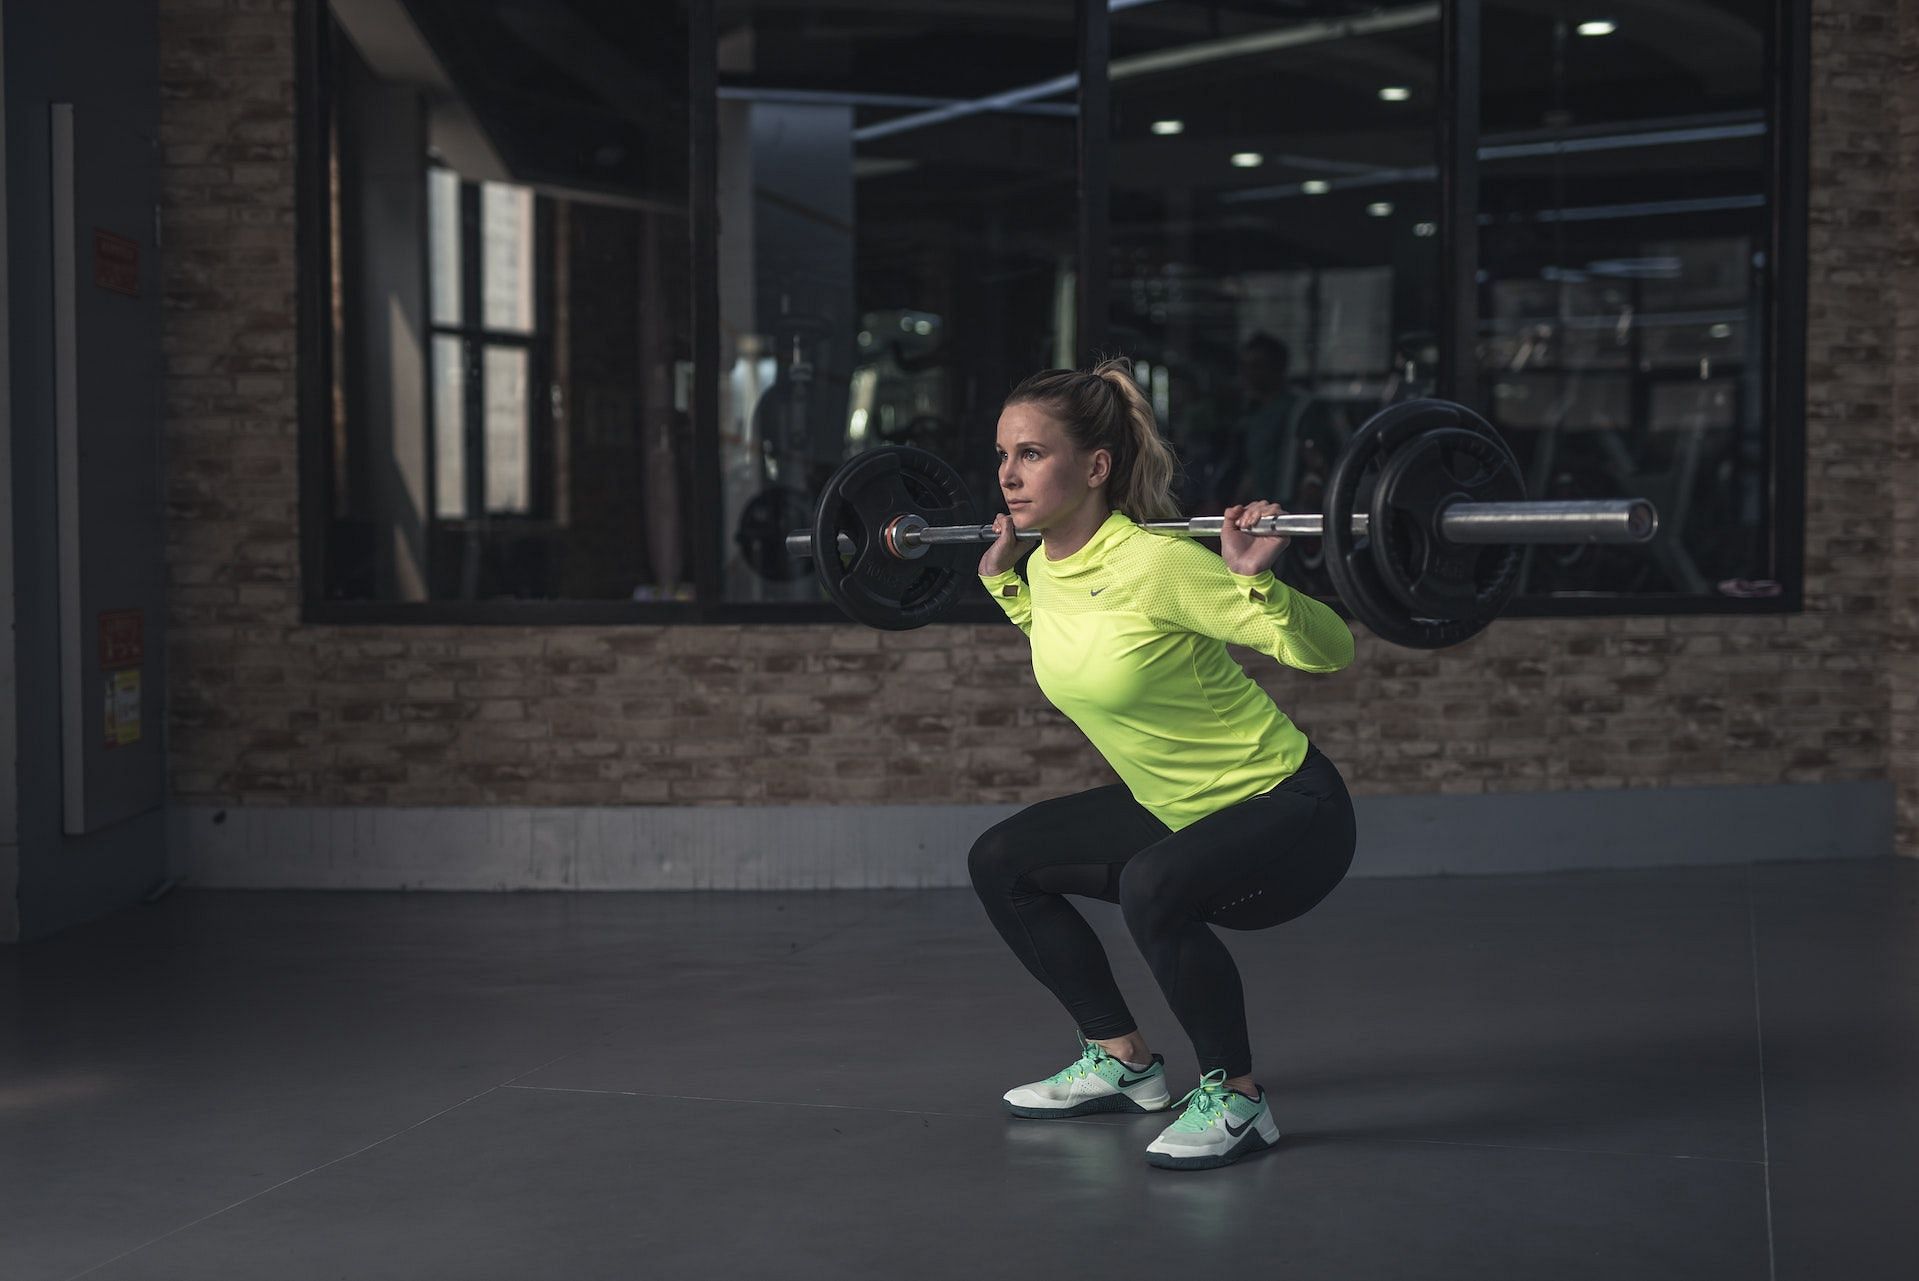 Barbell back squats are one of the best lower glute exercises. (Photo via Pexels/Li Sun)